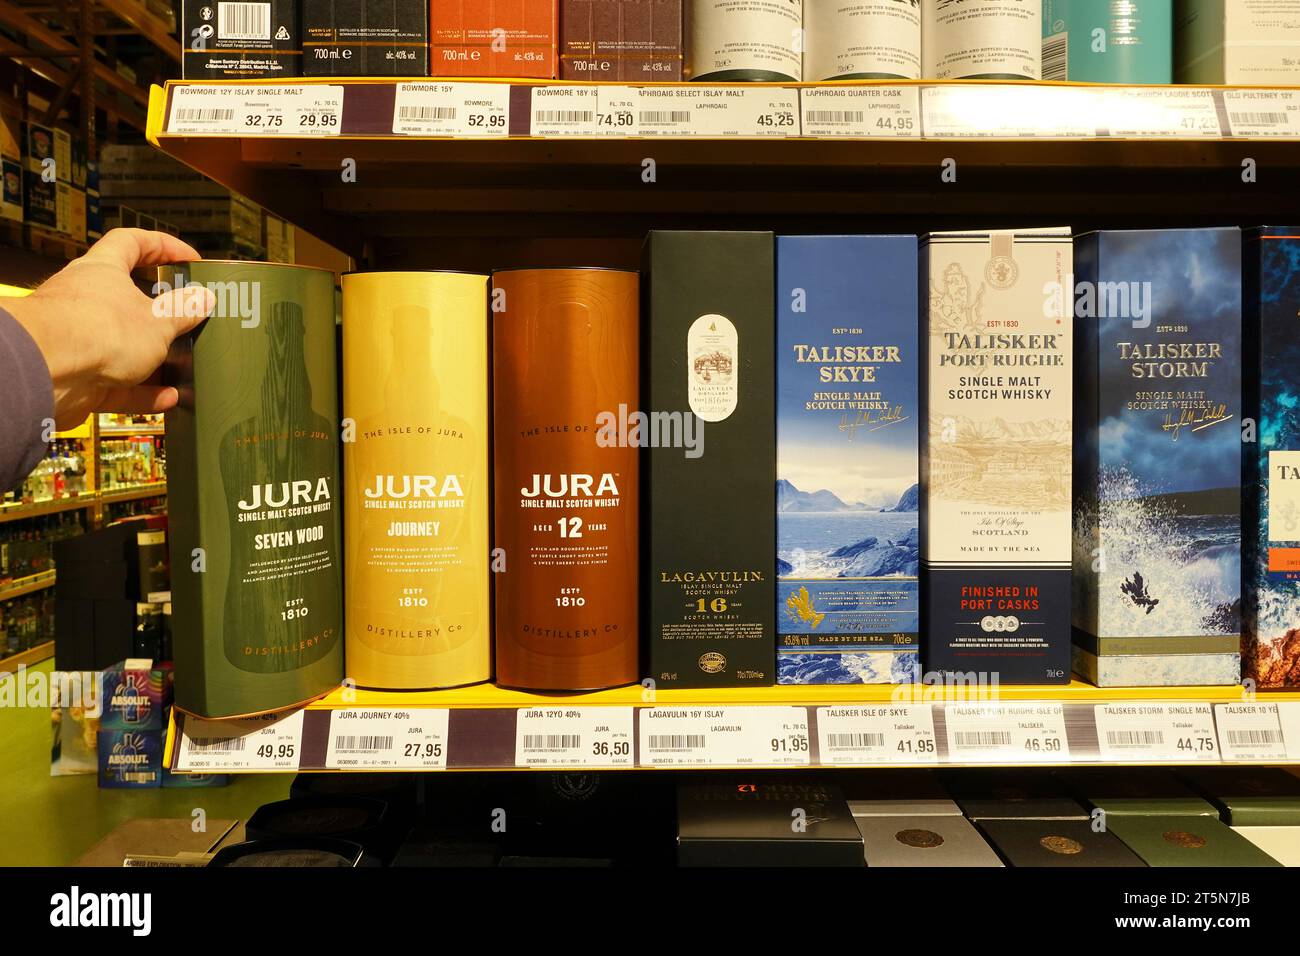 Jura,Lagavulin and Talisker brand whisky in a store Stock Photo